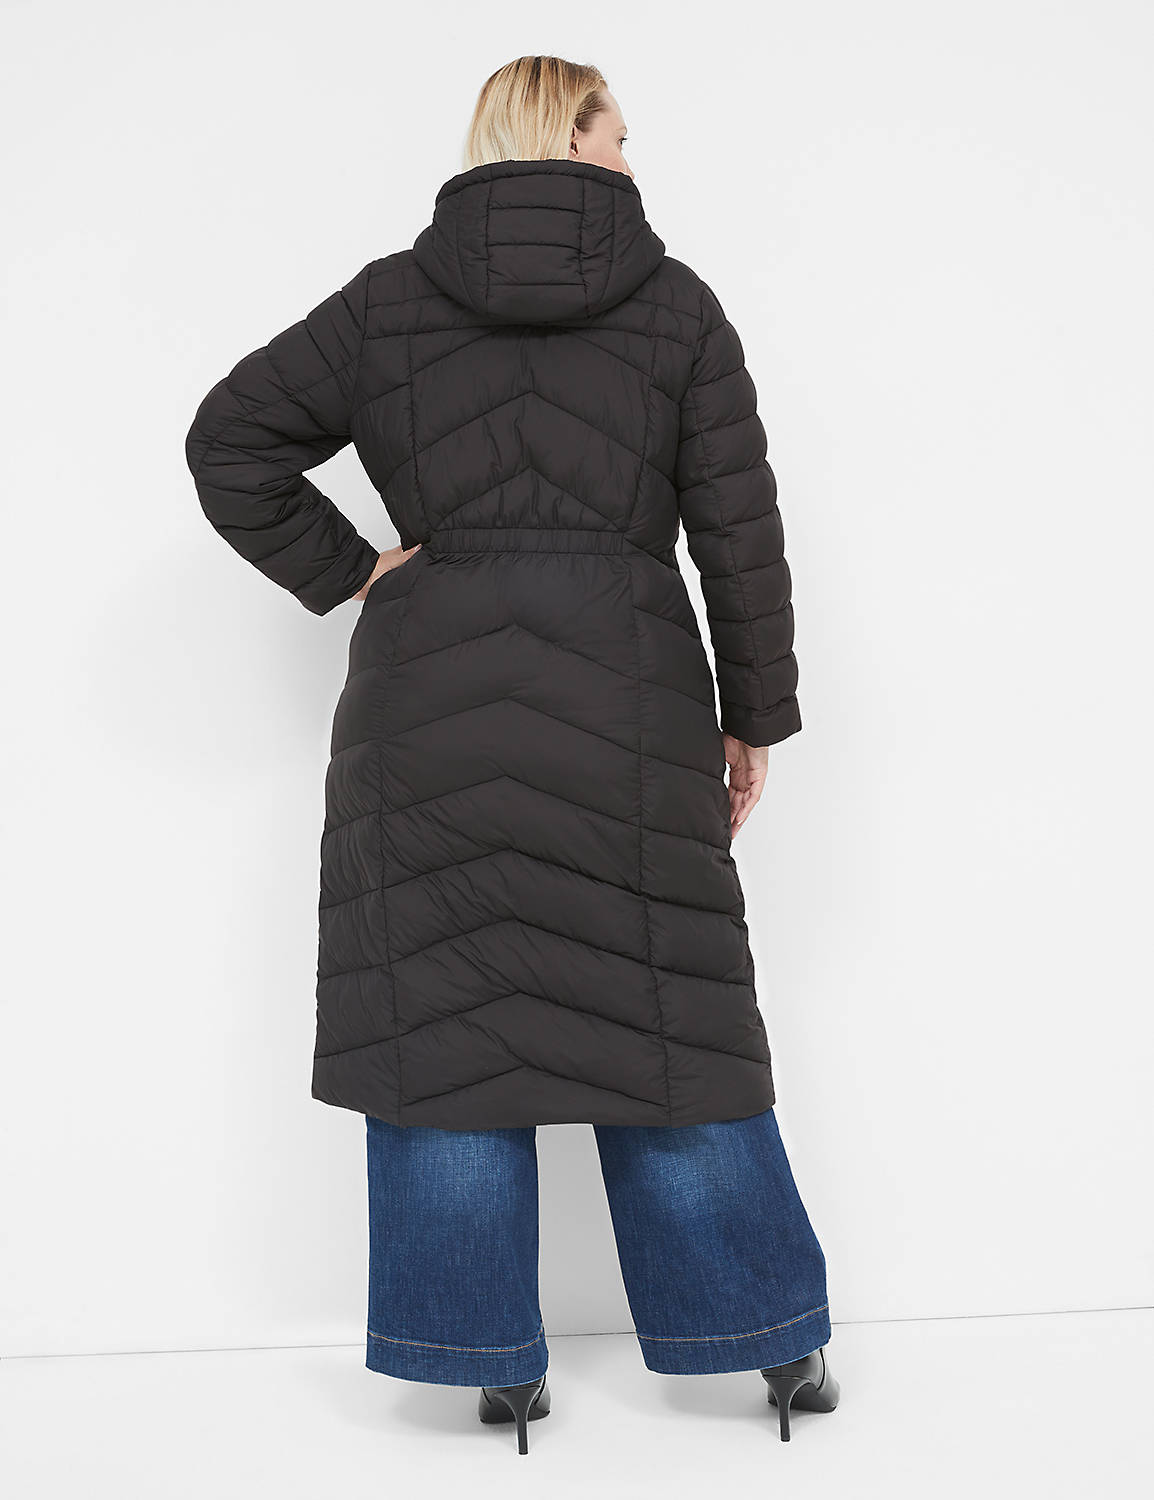 Front Zip Maxi Puffer 1136981 Product Image 2